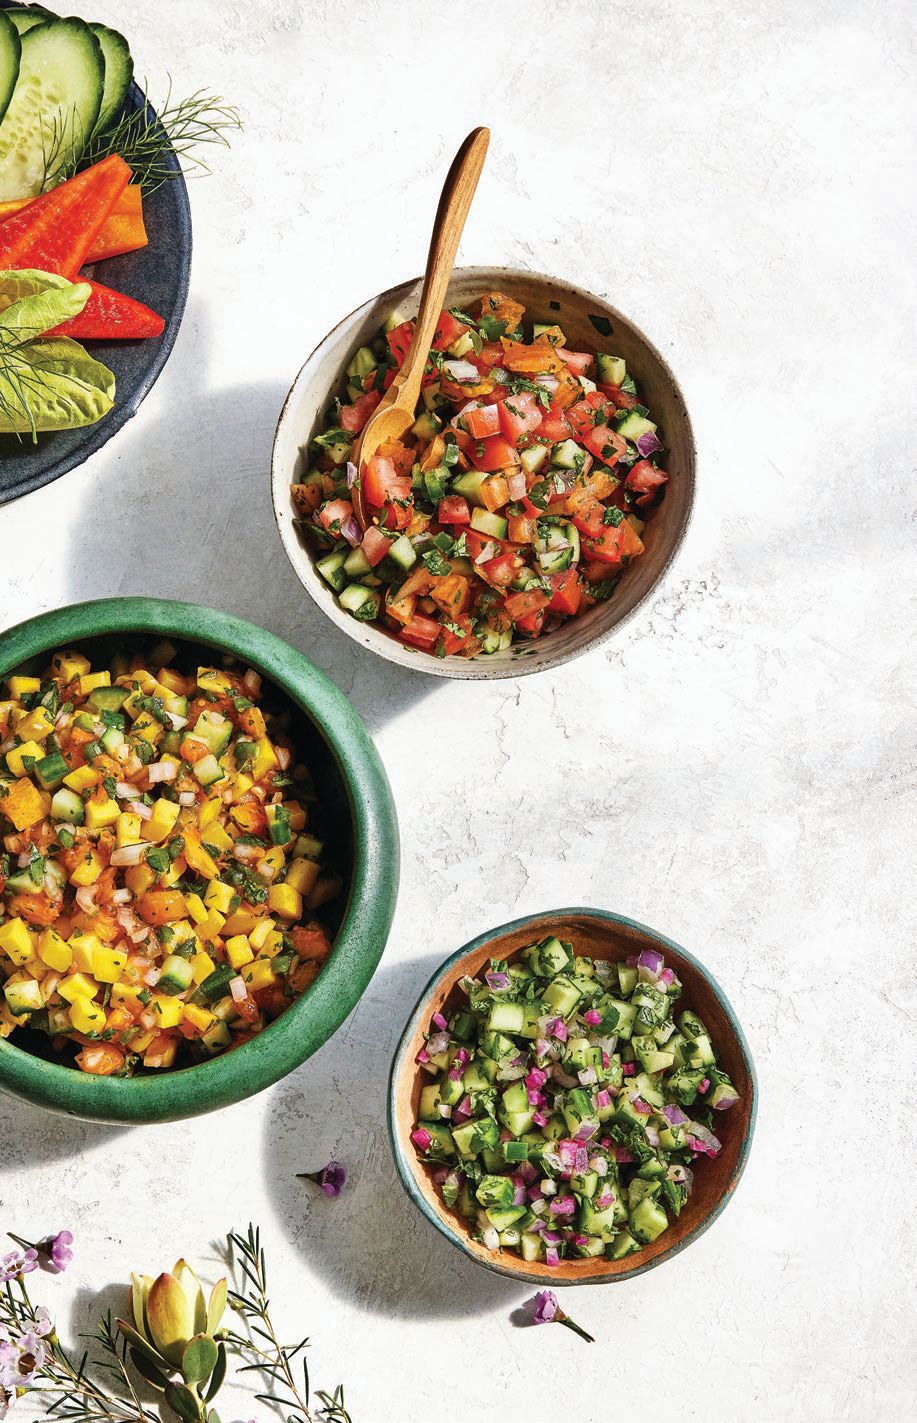 A trio of healthy salsas originally featured in Tracy Anderson Magazine are the smart snack of the season PHOTO COURTESY OF TRACY ANDERSON